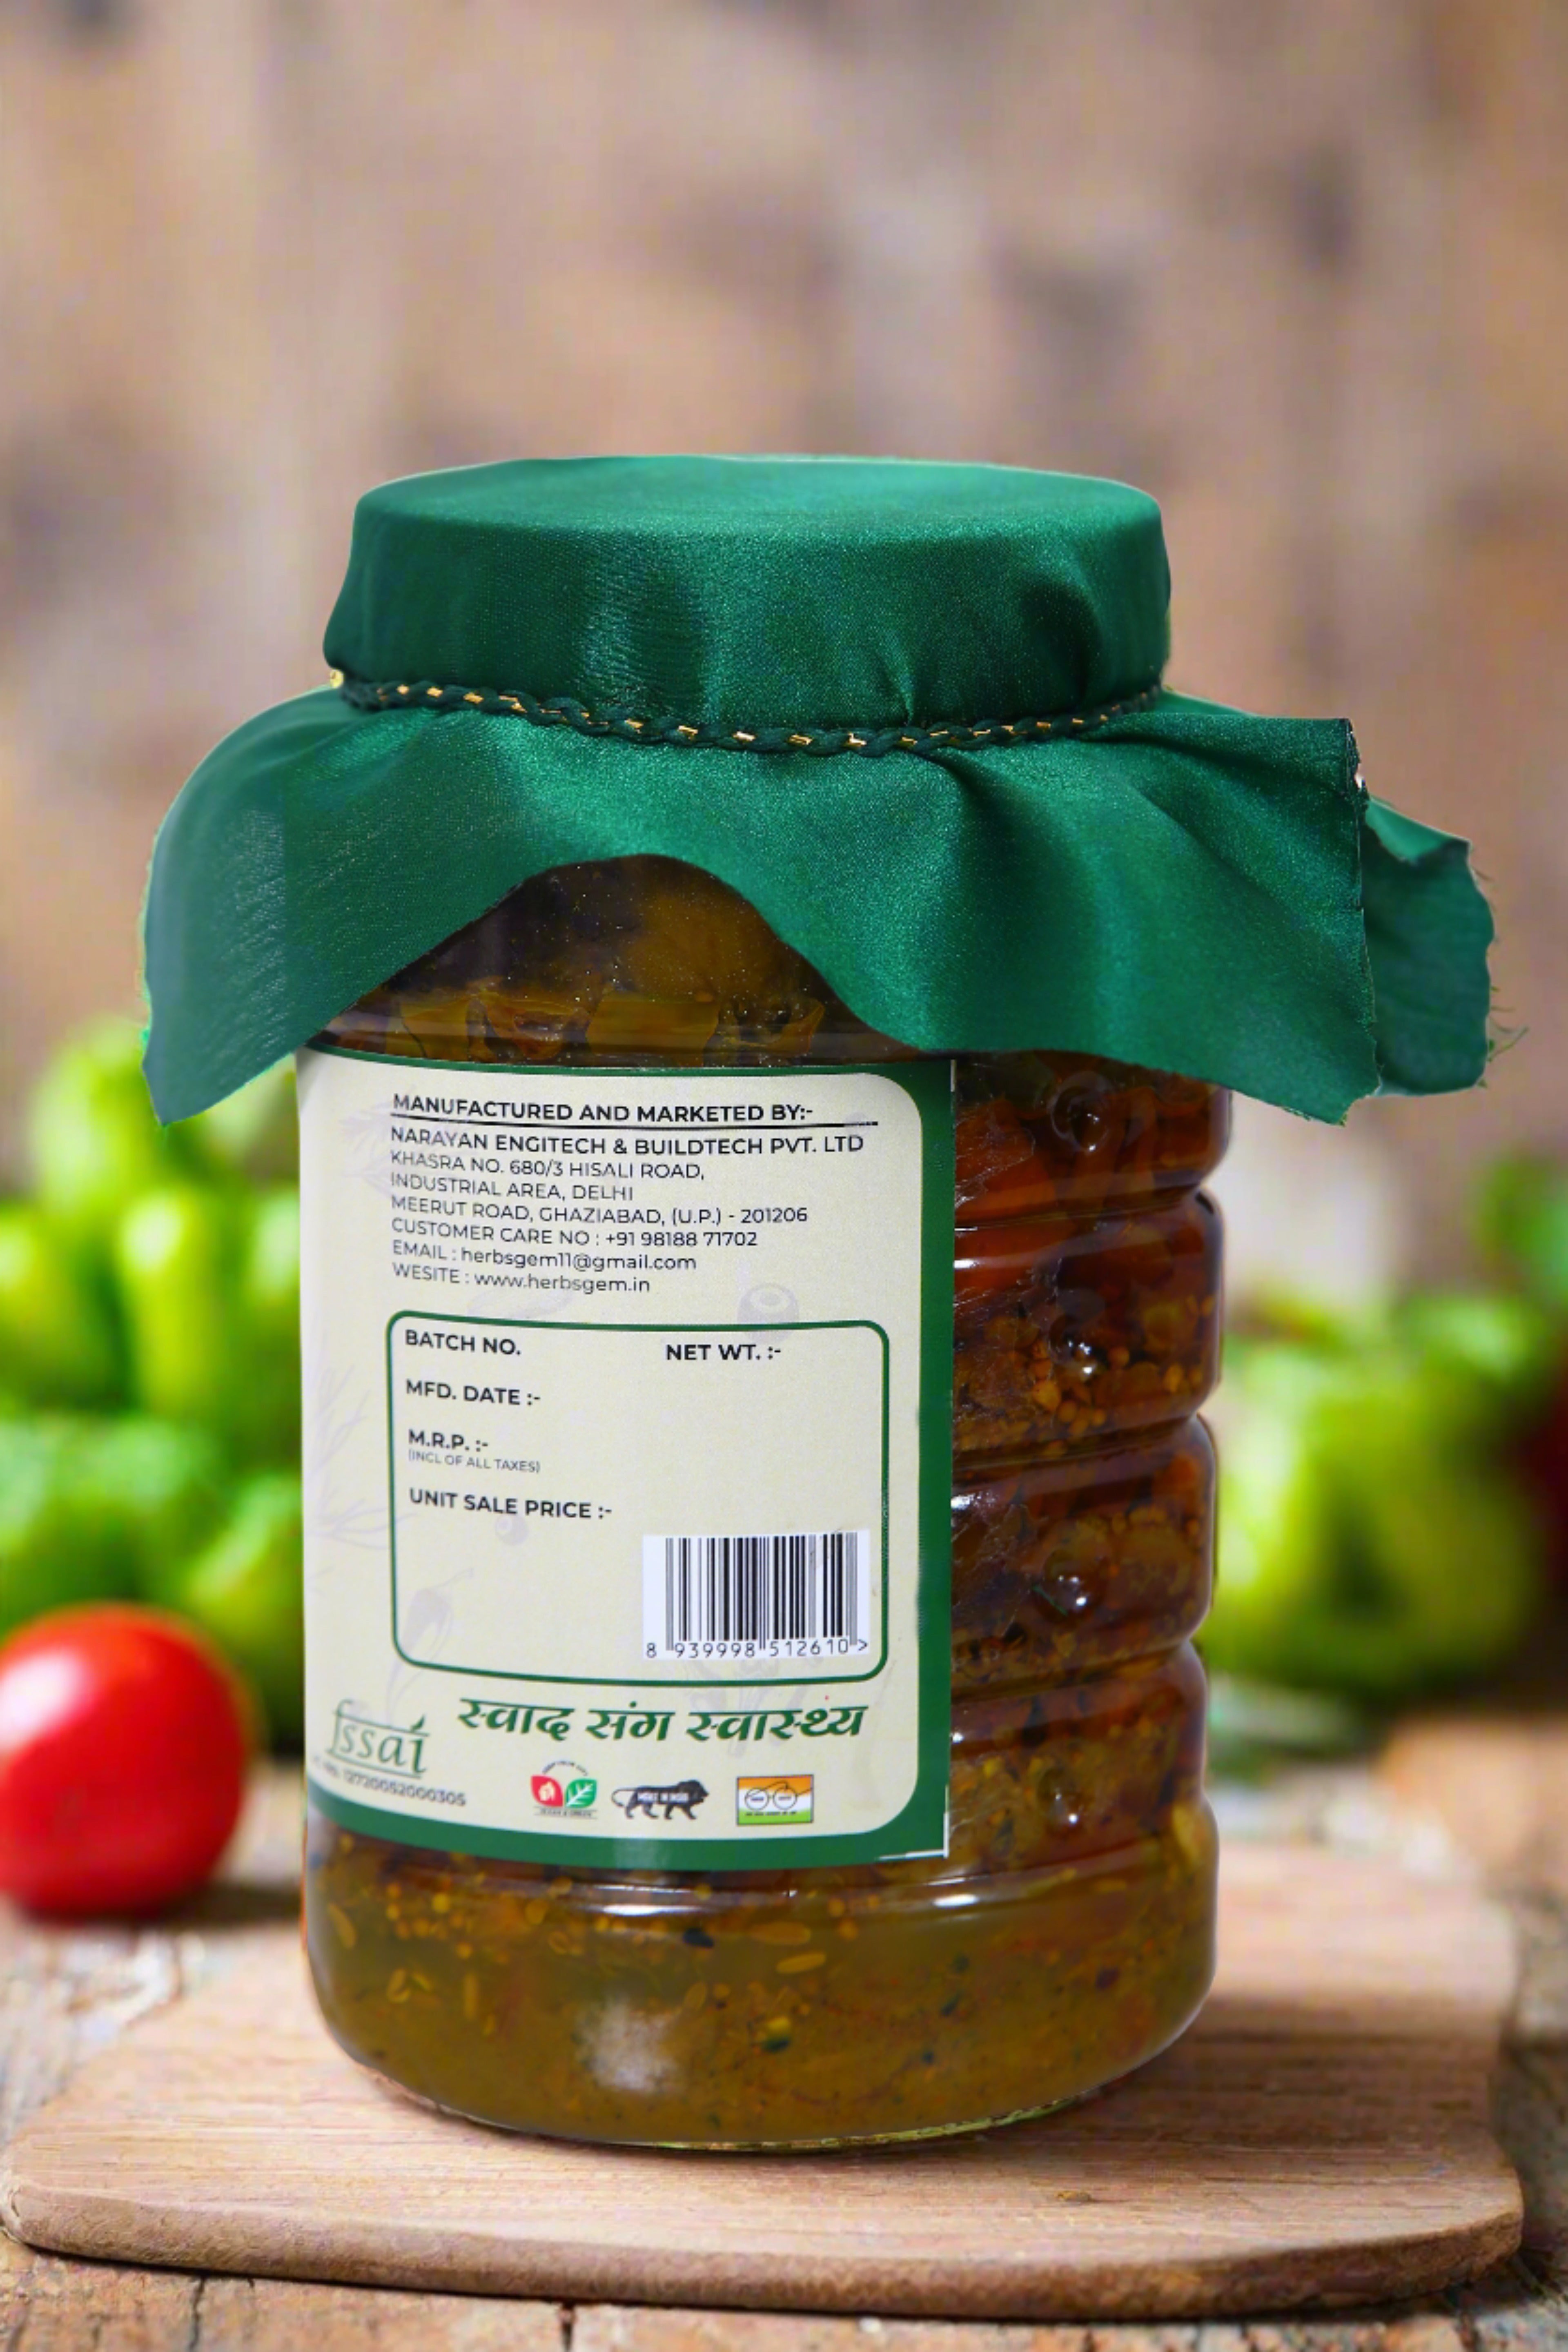 Herbsgem's Medley Marvel A Symphony of Flavors in our Signature Mixed Pickle